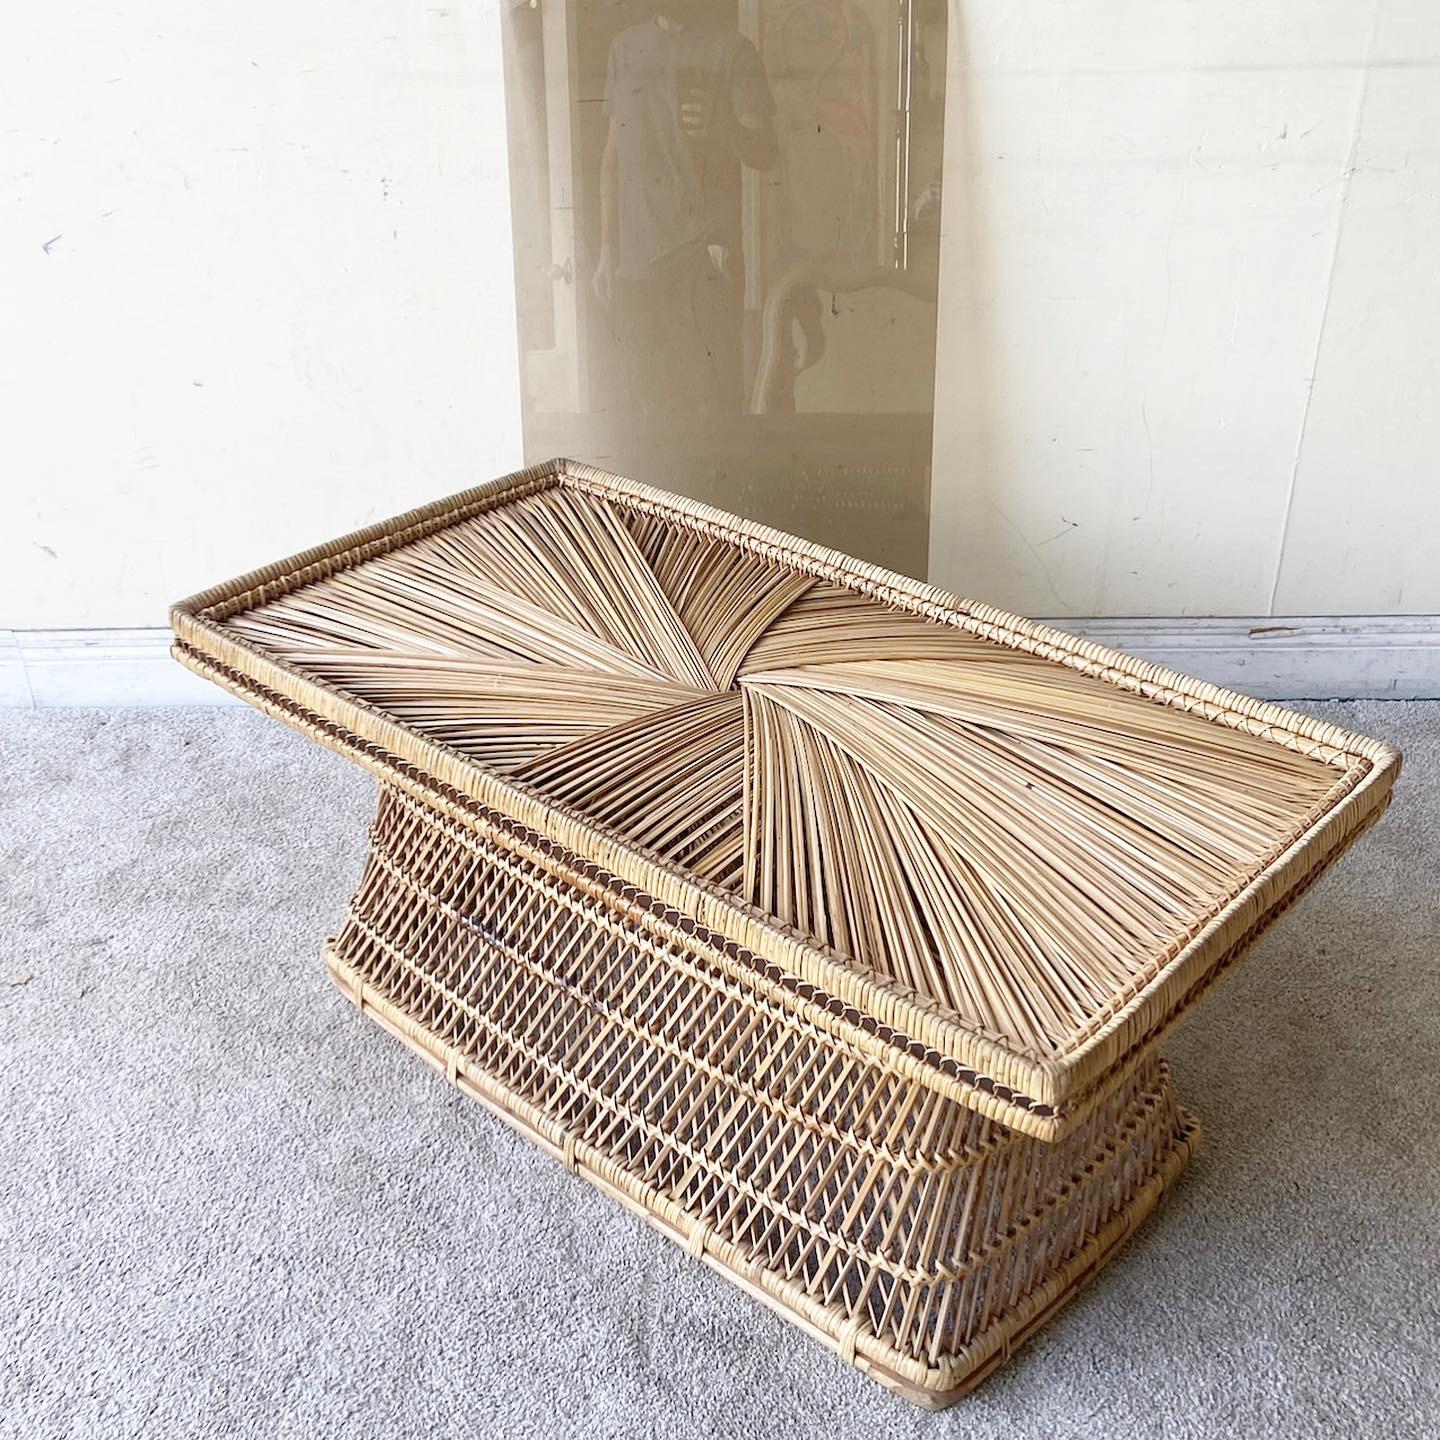 1980s Boho Chic Buri Rattan Smoked Glass Top Coffee Table In Good Condition For Sale In Delray Beach, FL